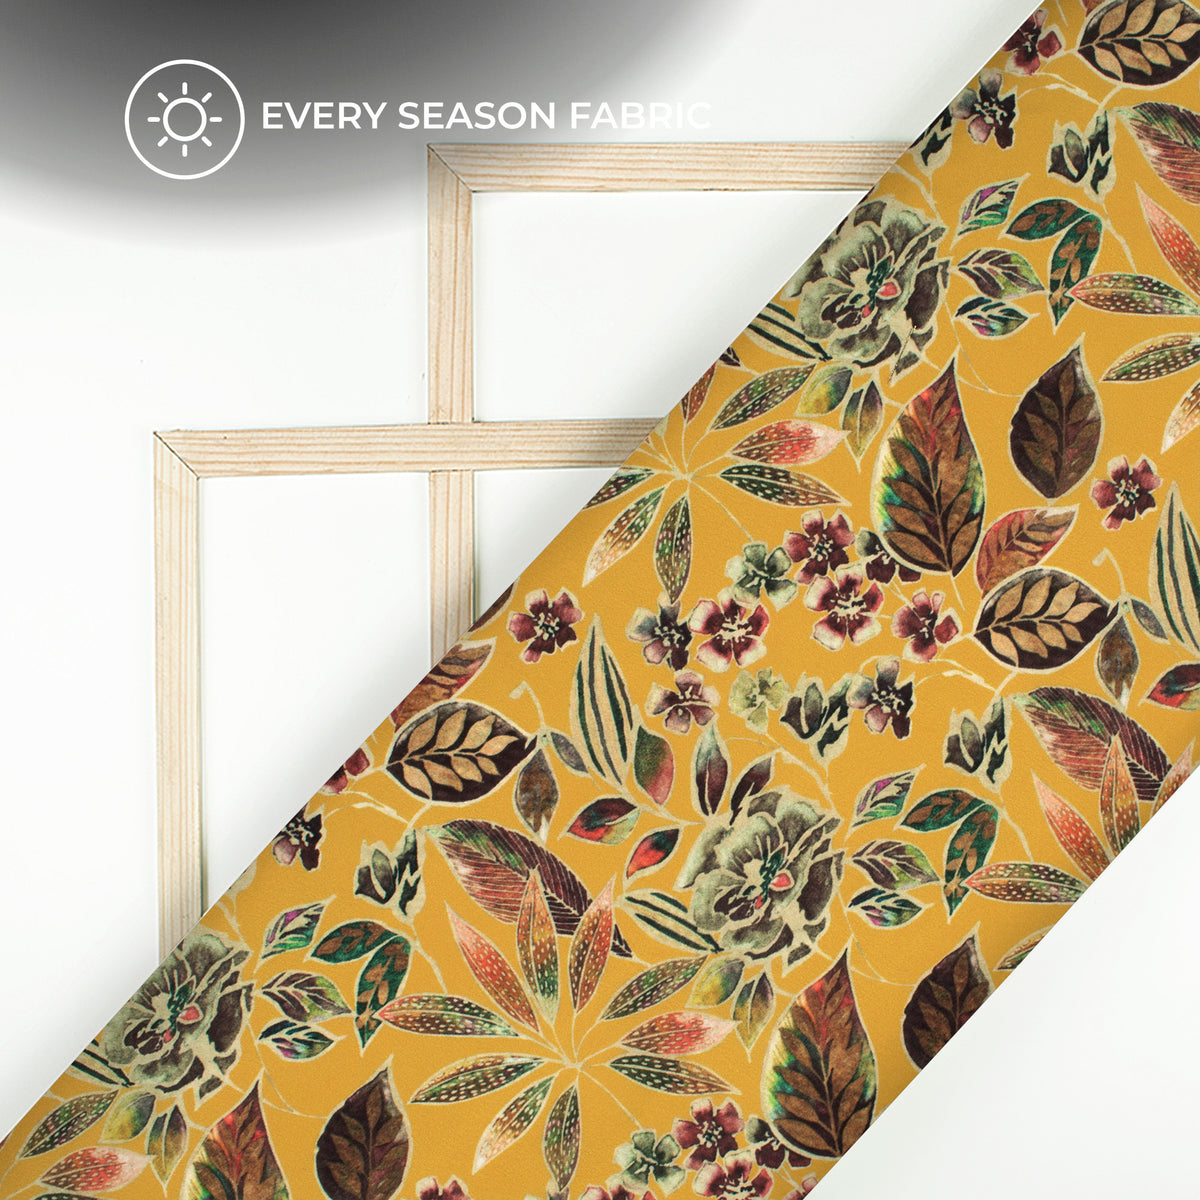 Mustard Yellow and Brown Floral Digital Print BSY Crepe Fabric